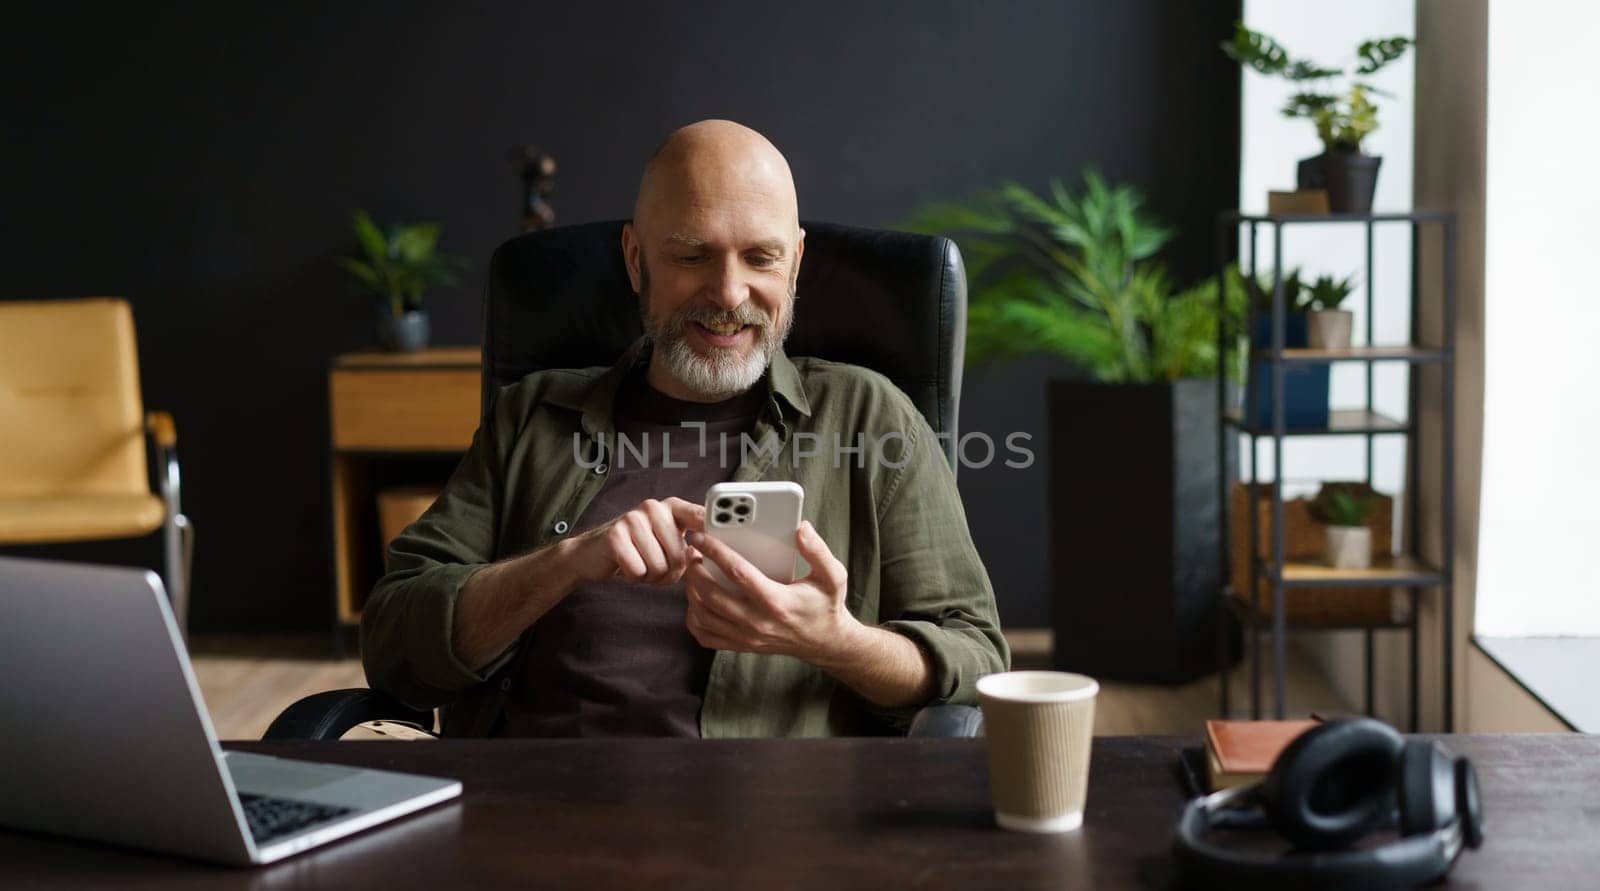 Bald and respectable man with gray beard. He captured in moment of joy, smiles while reading messages on phone. Computer, cup of coffee, and audio headphones are present on the table. by LipikStockMedia